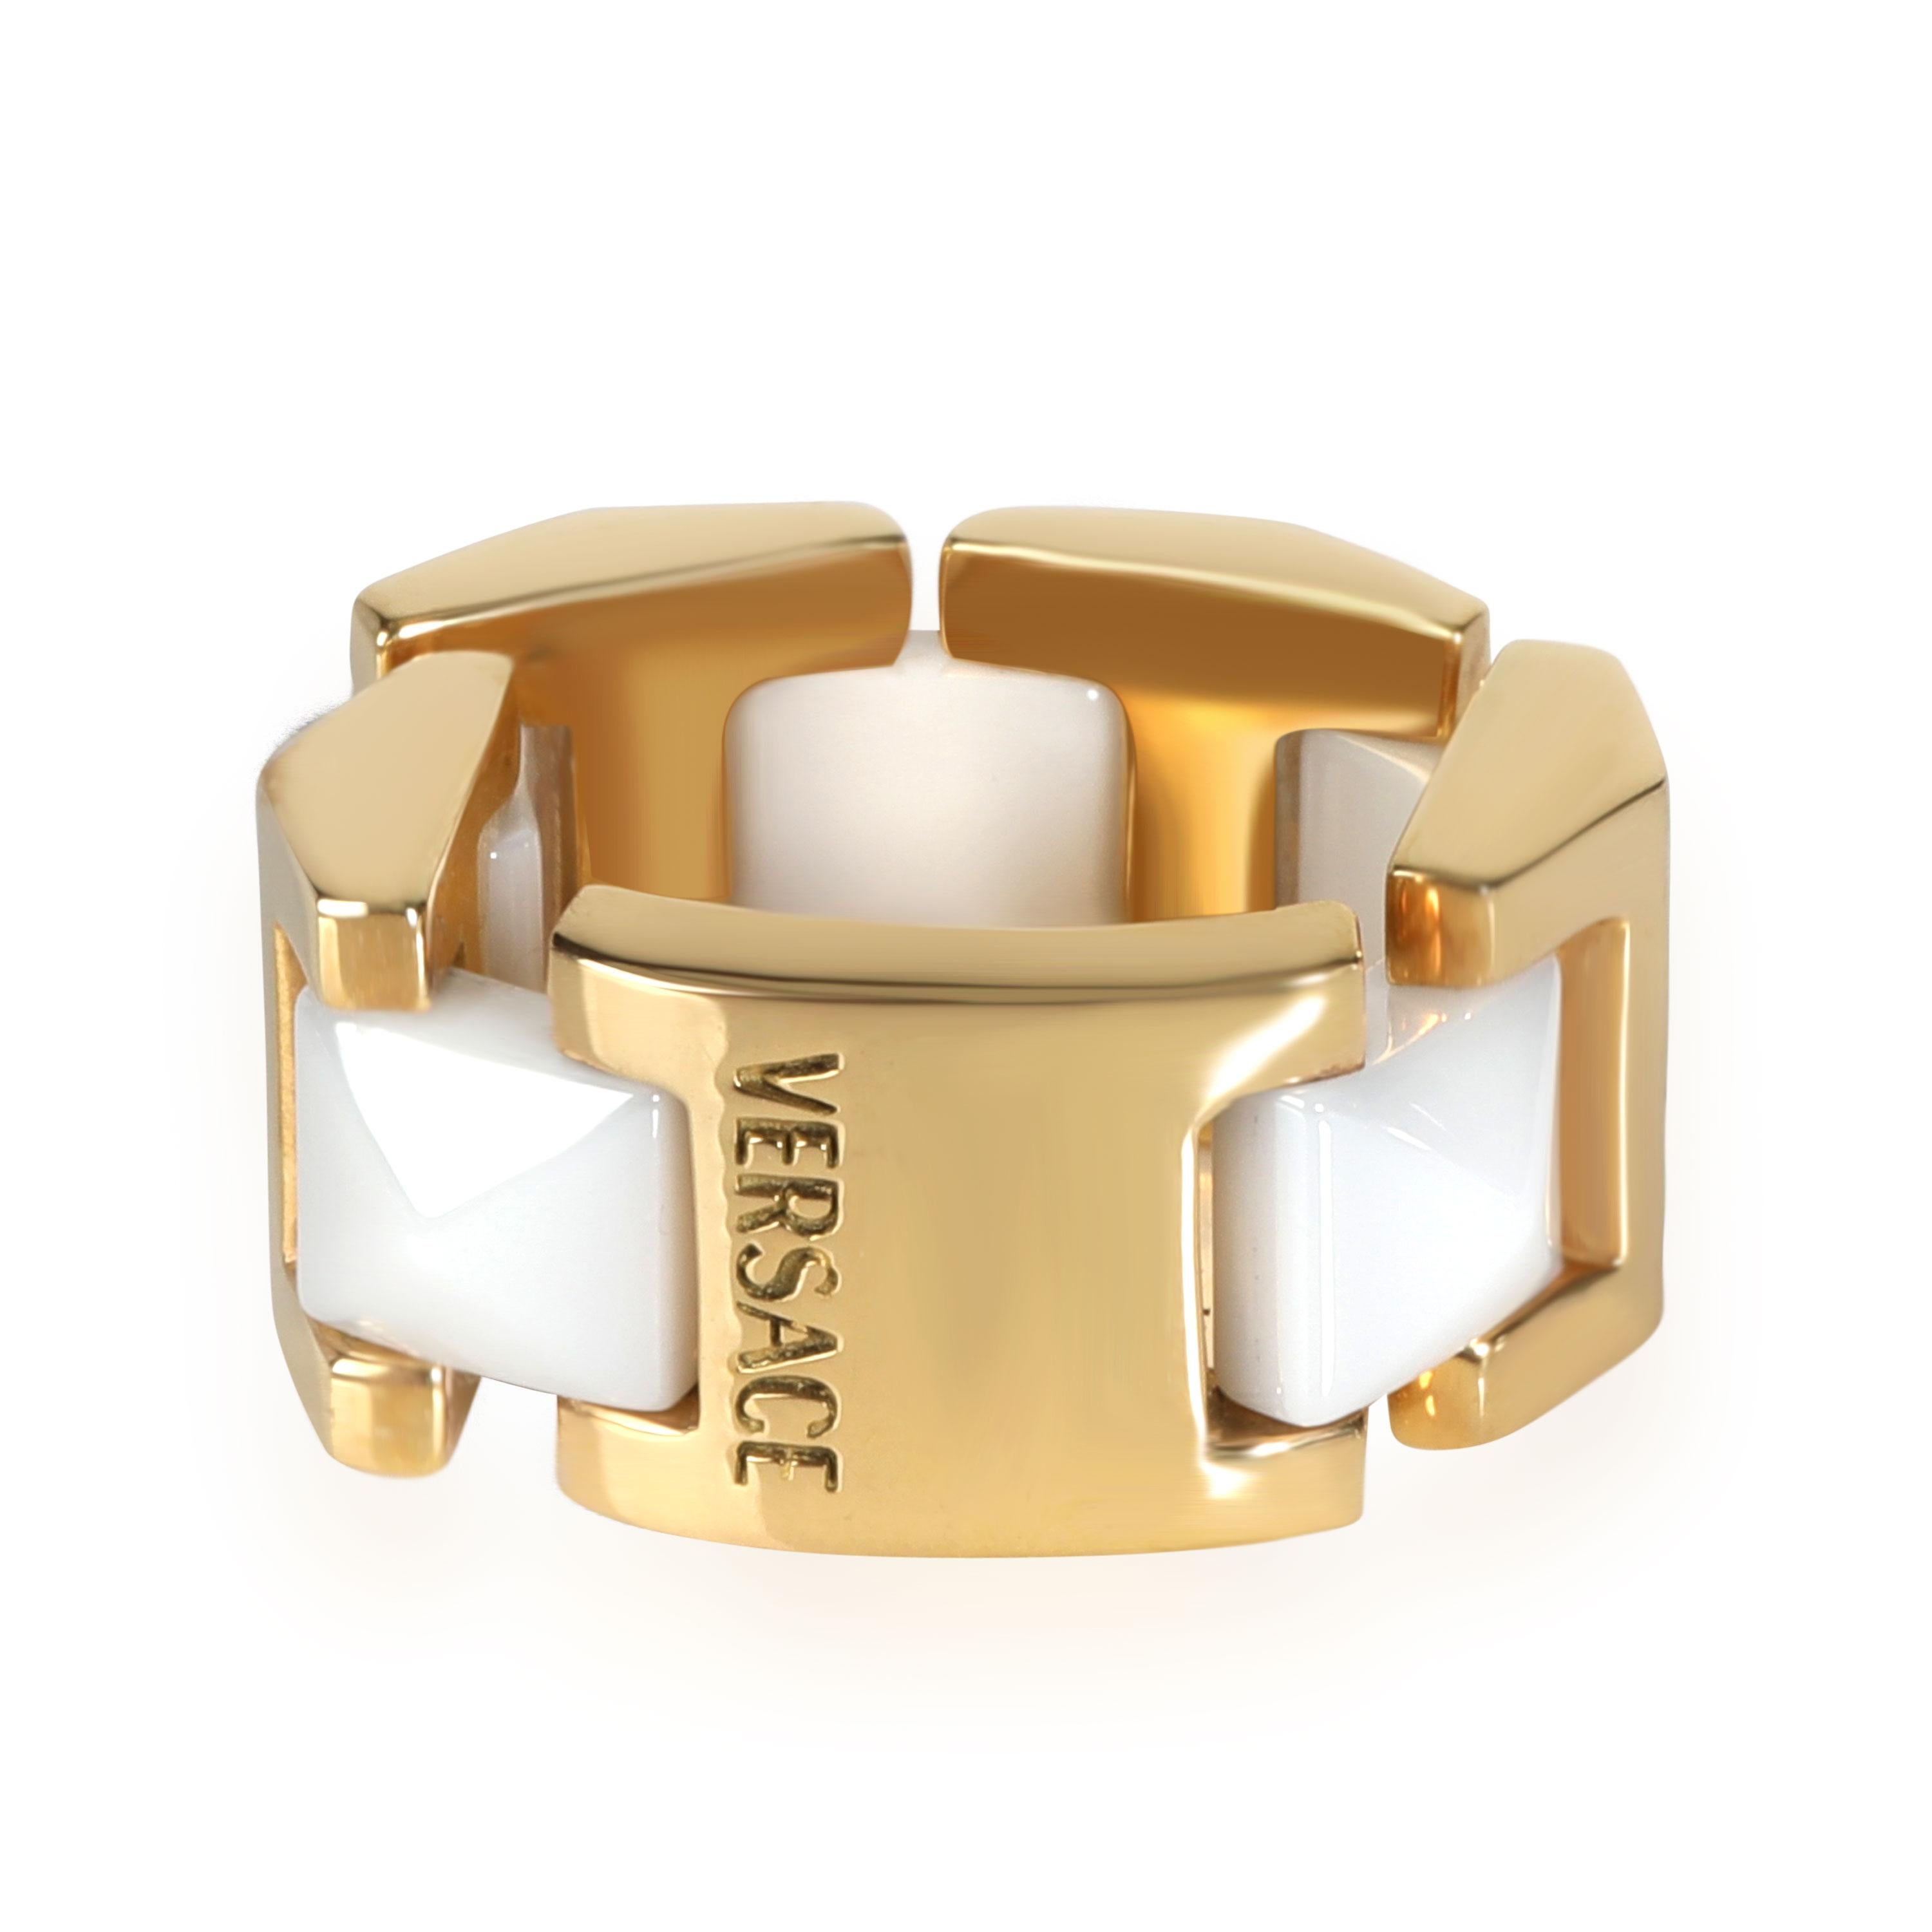 Versace White Ceramic Pyramids Flexible Ring in 18K Yellow Gold

PRIMARY DETAILS
SKU: 111327
Listing Title: Versace White Ceramic Pyramids Flexible Ring in 18K Yellow Gold
Condition Description: Retails for 1800 USD. In excellent condition and